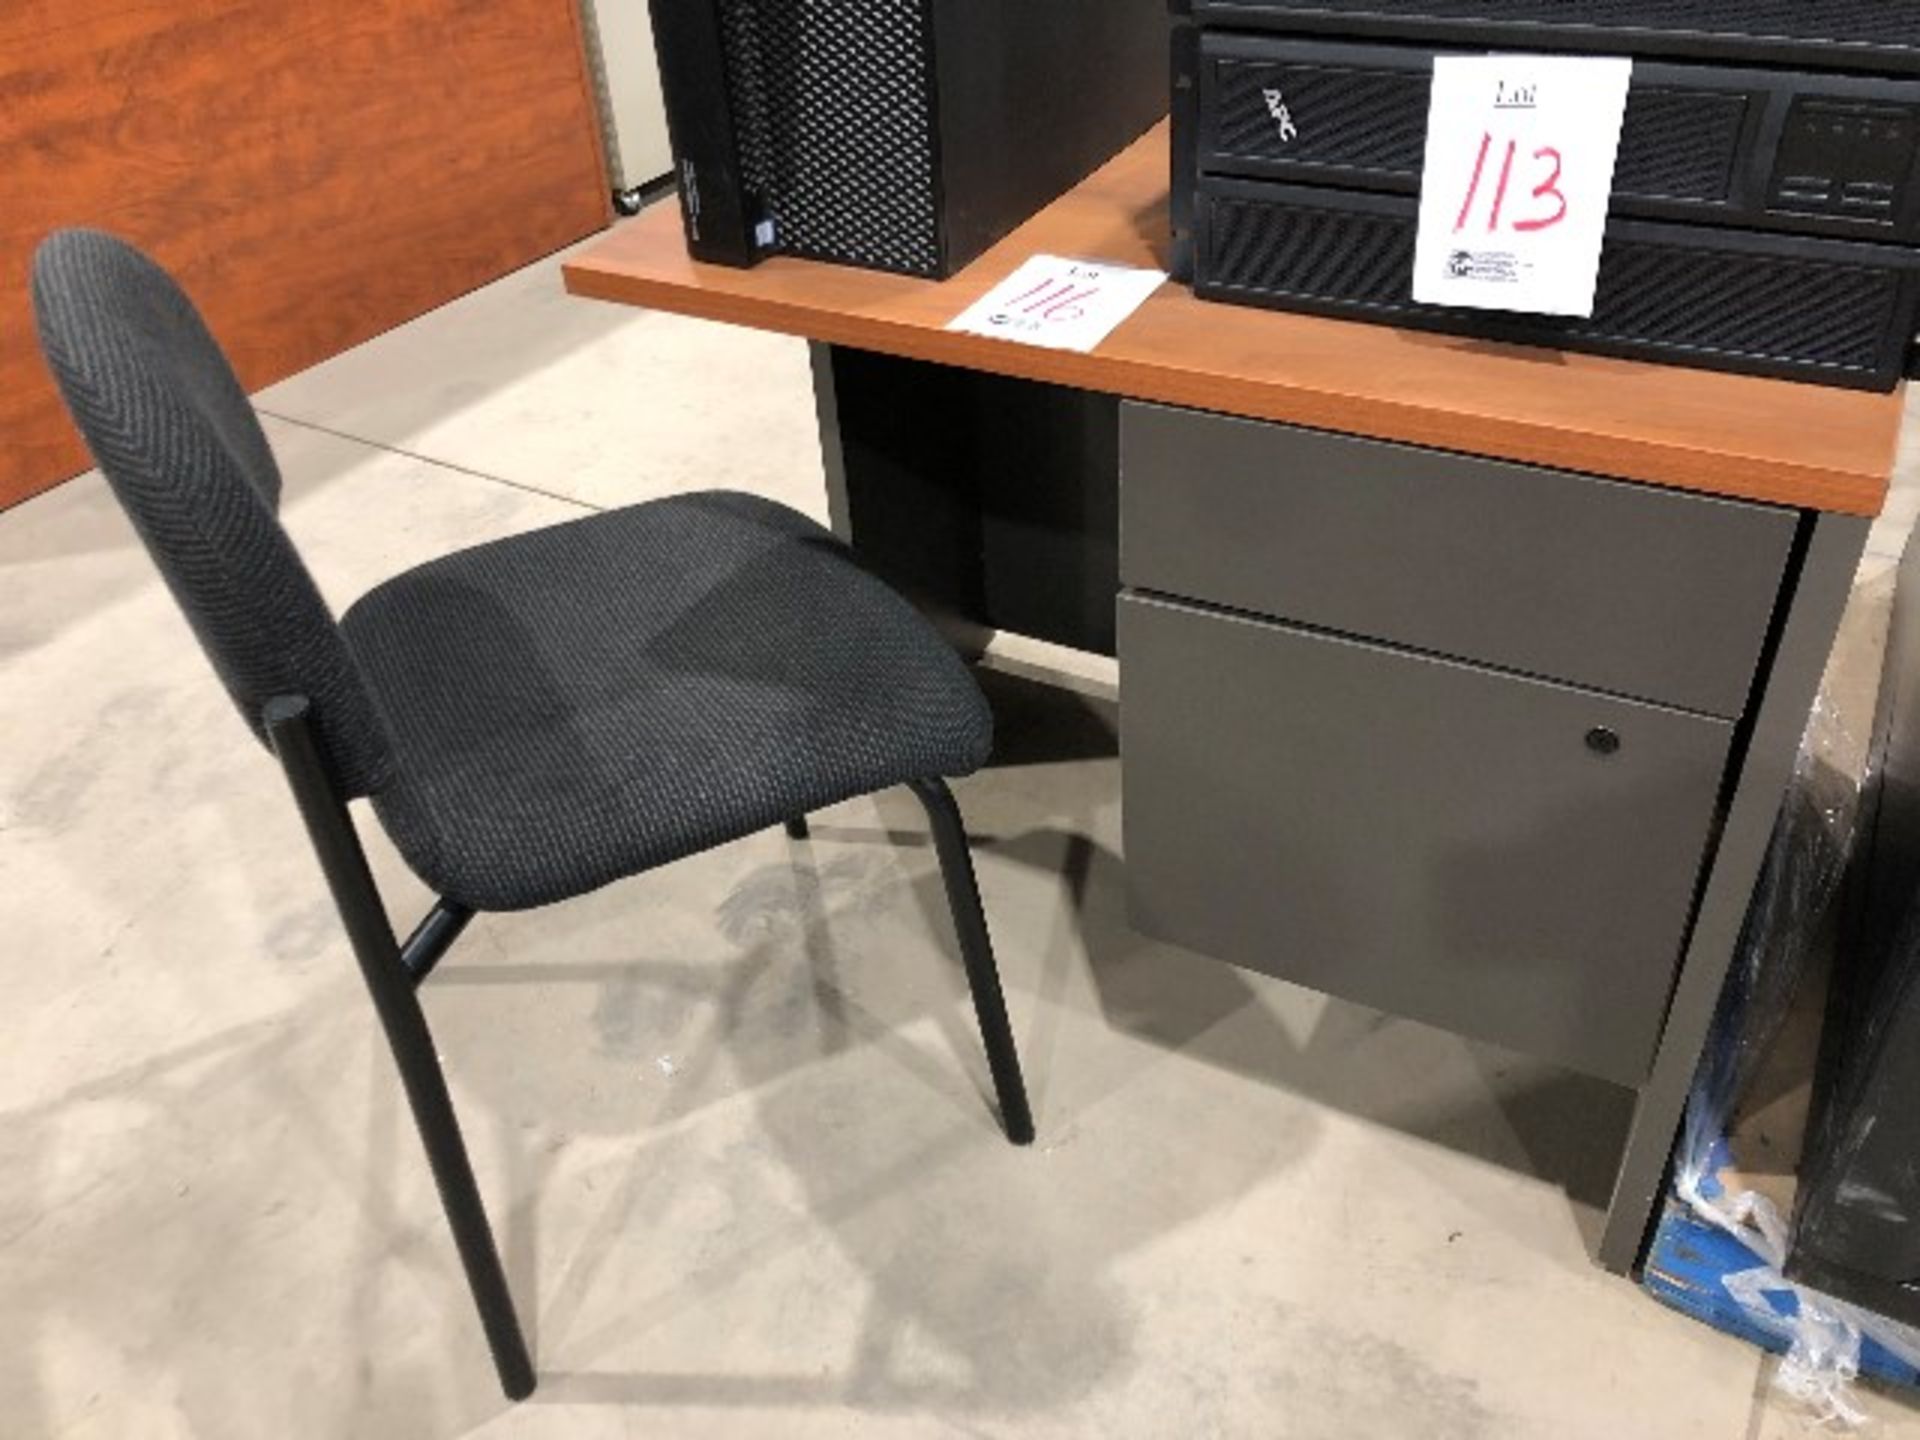 Work table & chair, 2pcs (Lot)